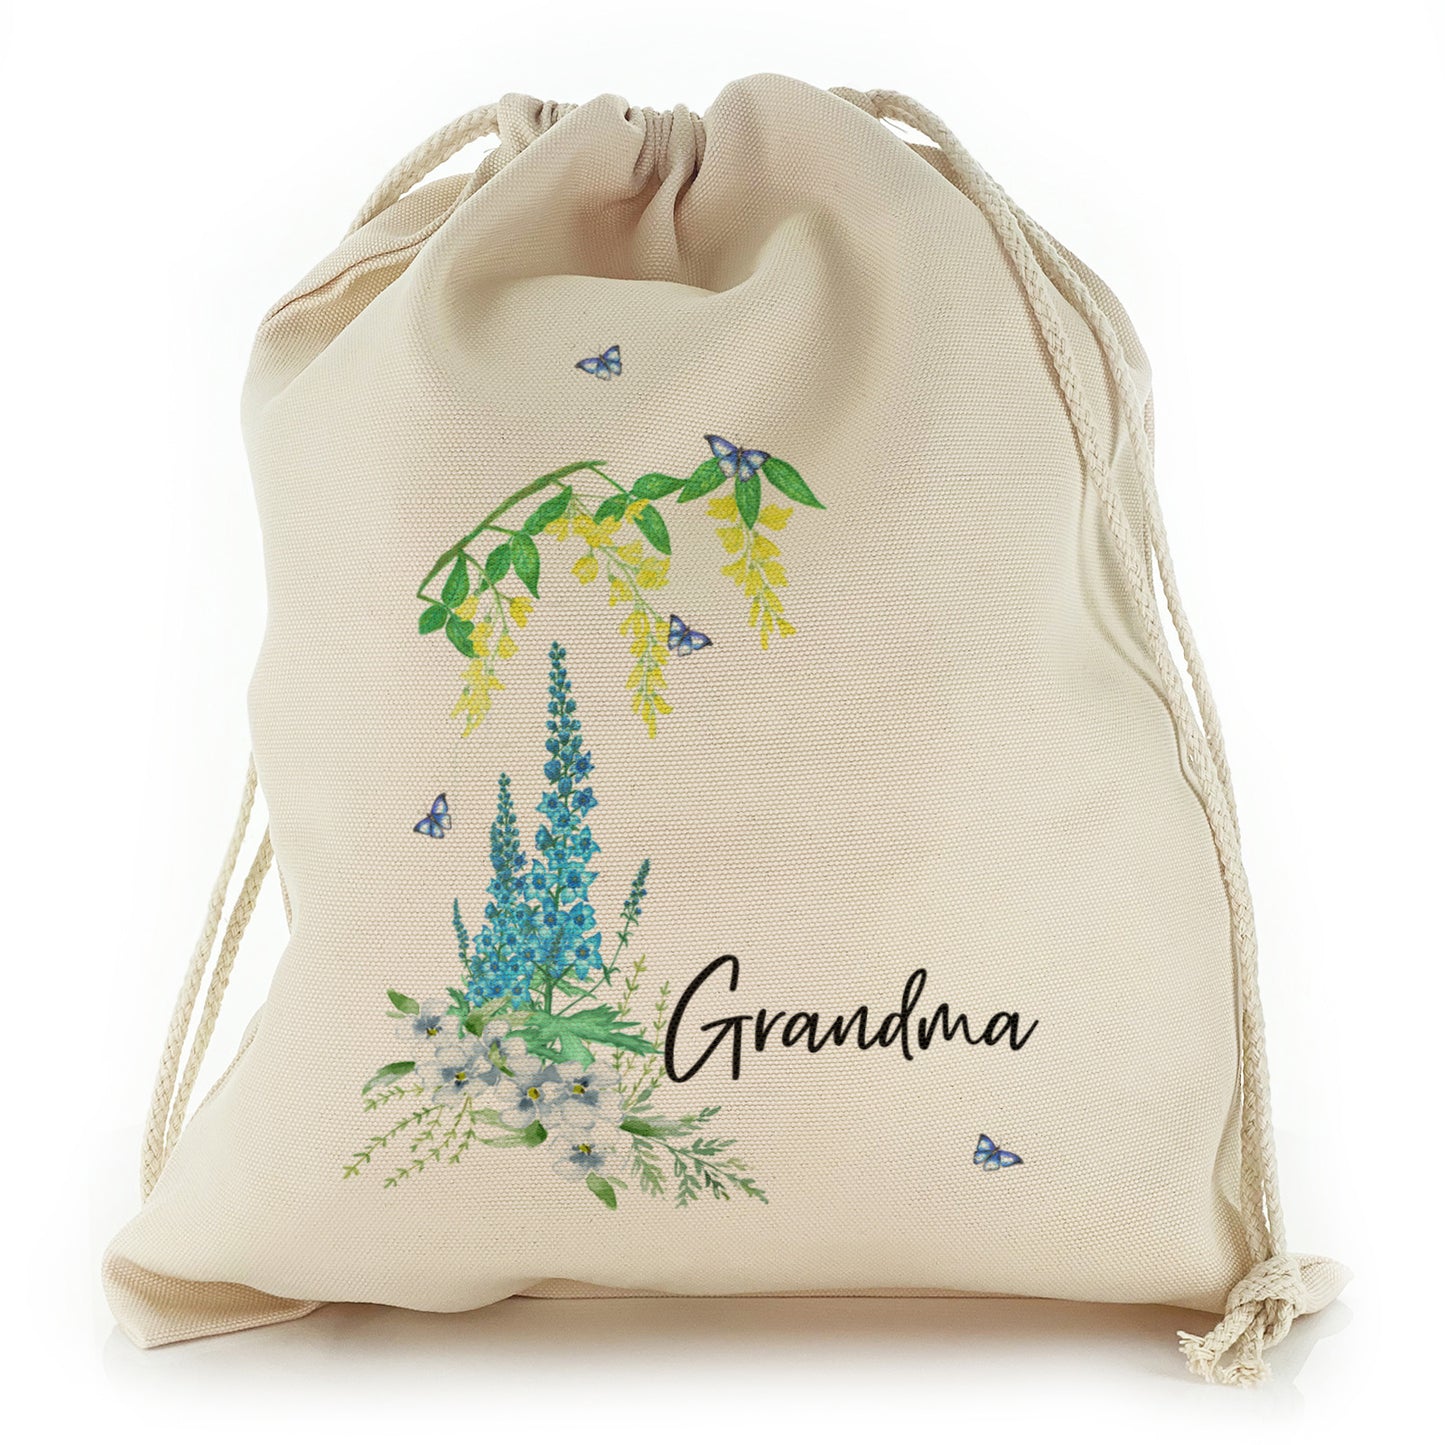 Personalised Canvas Sack with Stylish Text and Beautiful Garden Flowers Print